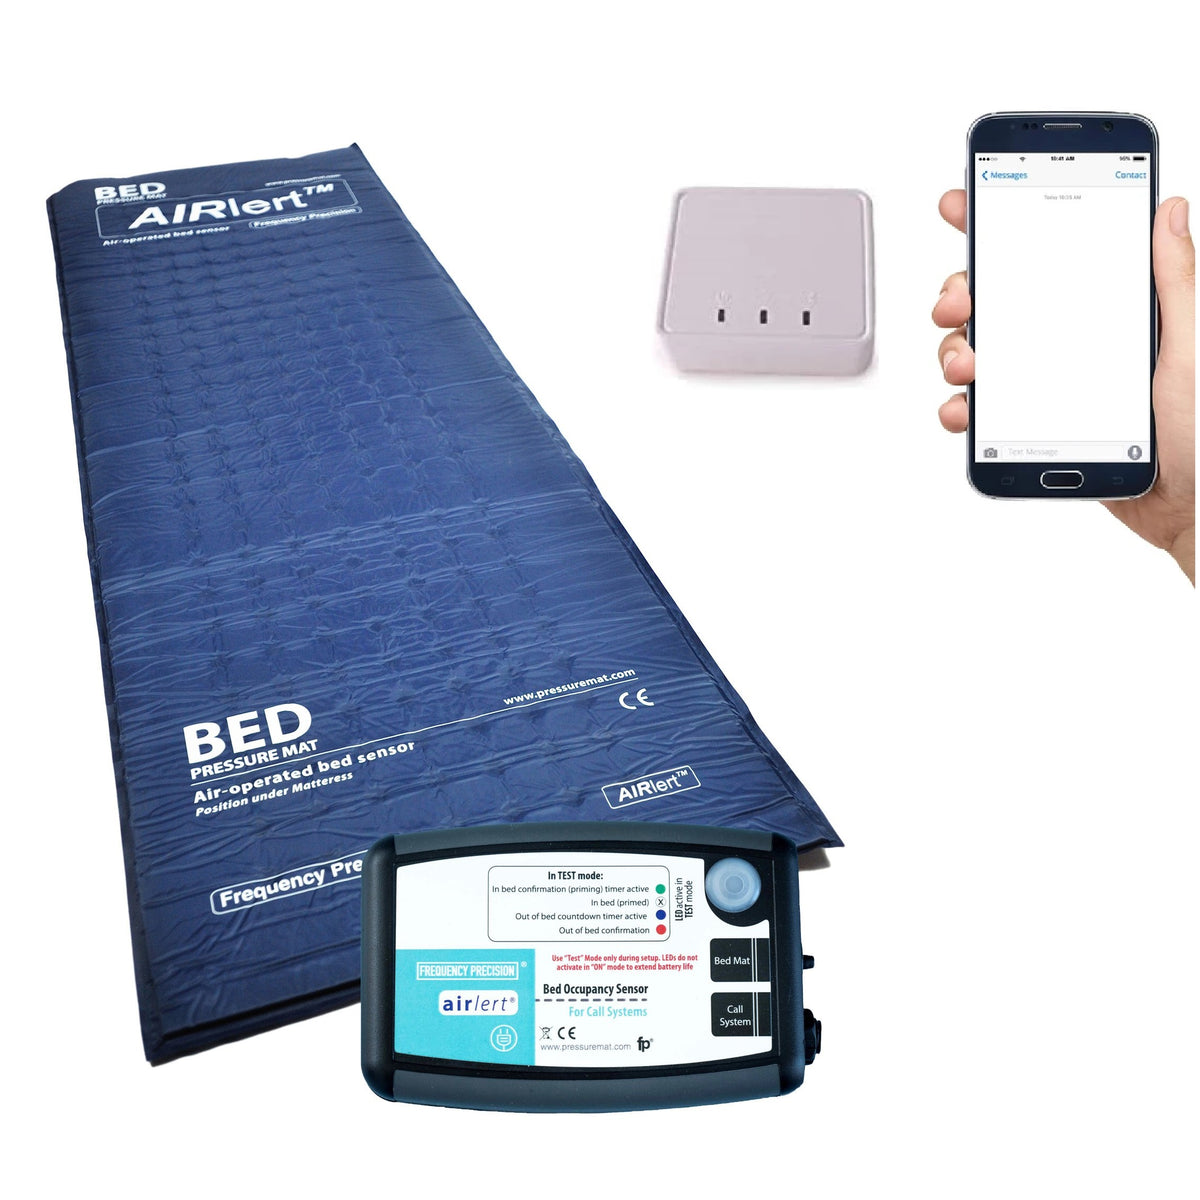 A product photo of the Wireless Bed Pressure Mat &amp; Pager set, with a person holding a phone